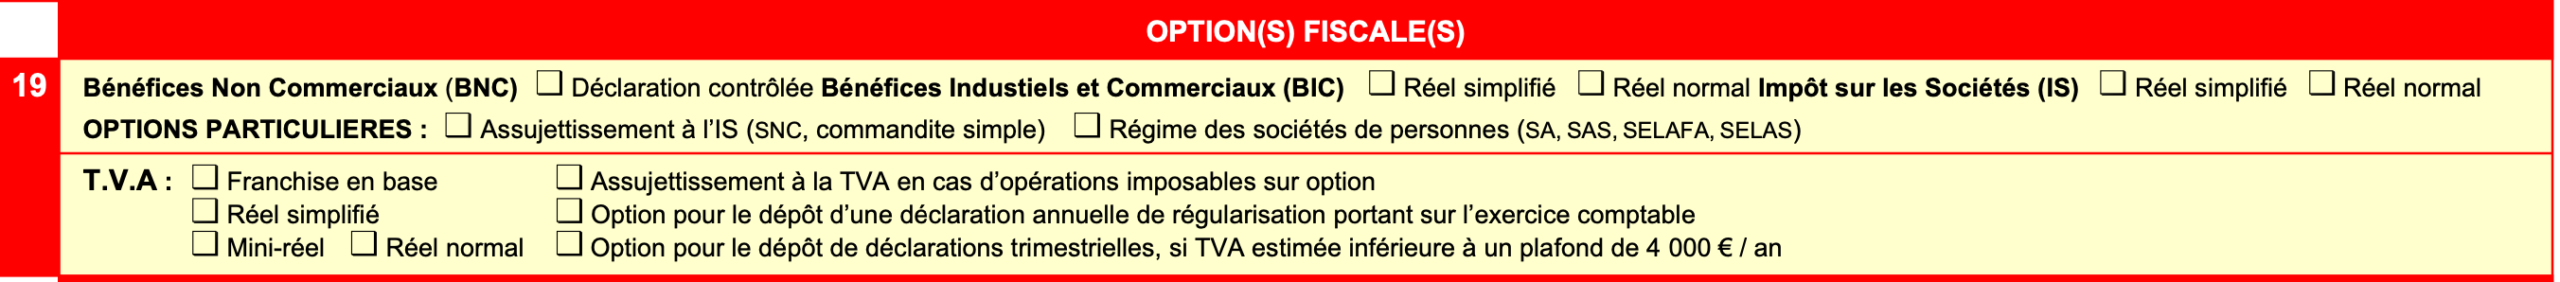 M0-options-fiscales